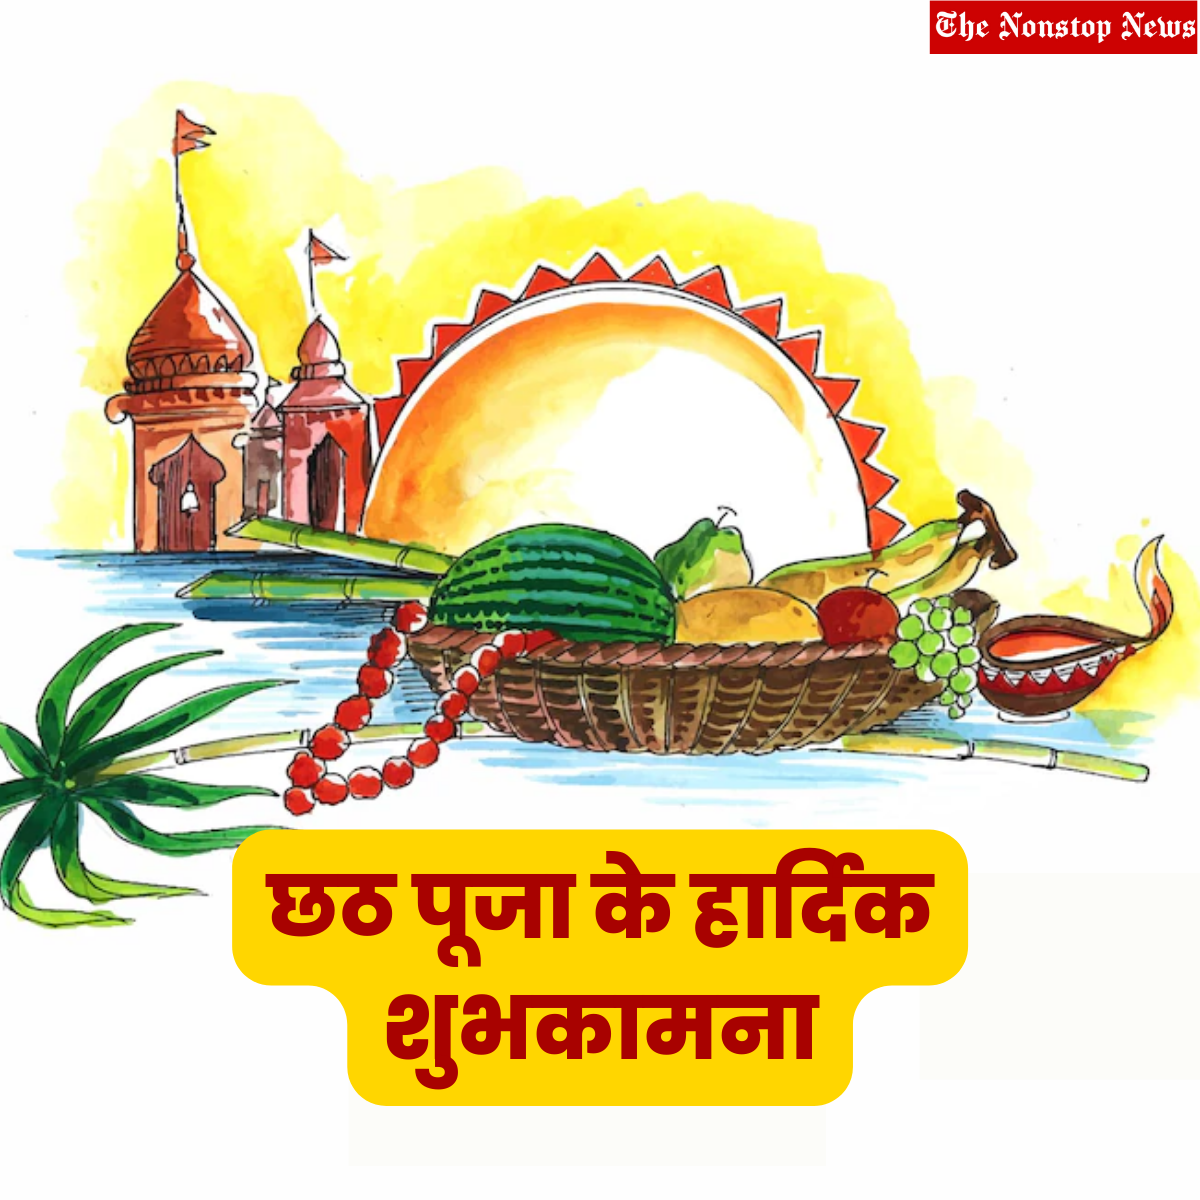 Happy Chhath Puja Wishes in Bhojpuri 2022 Greetings, Quotes, Posters, Images, and Messages